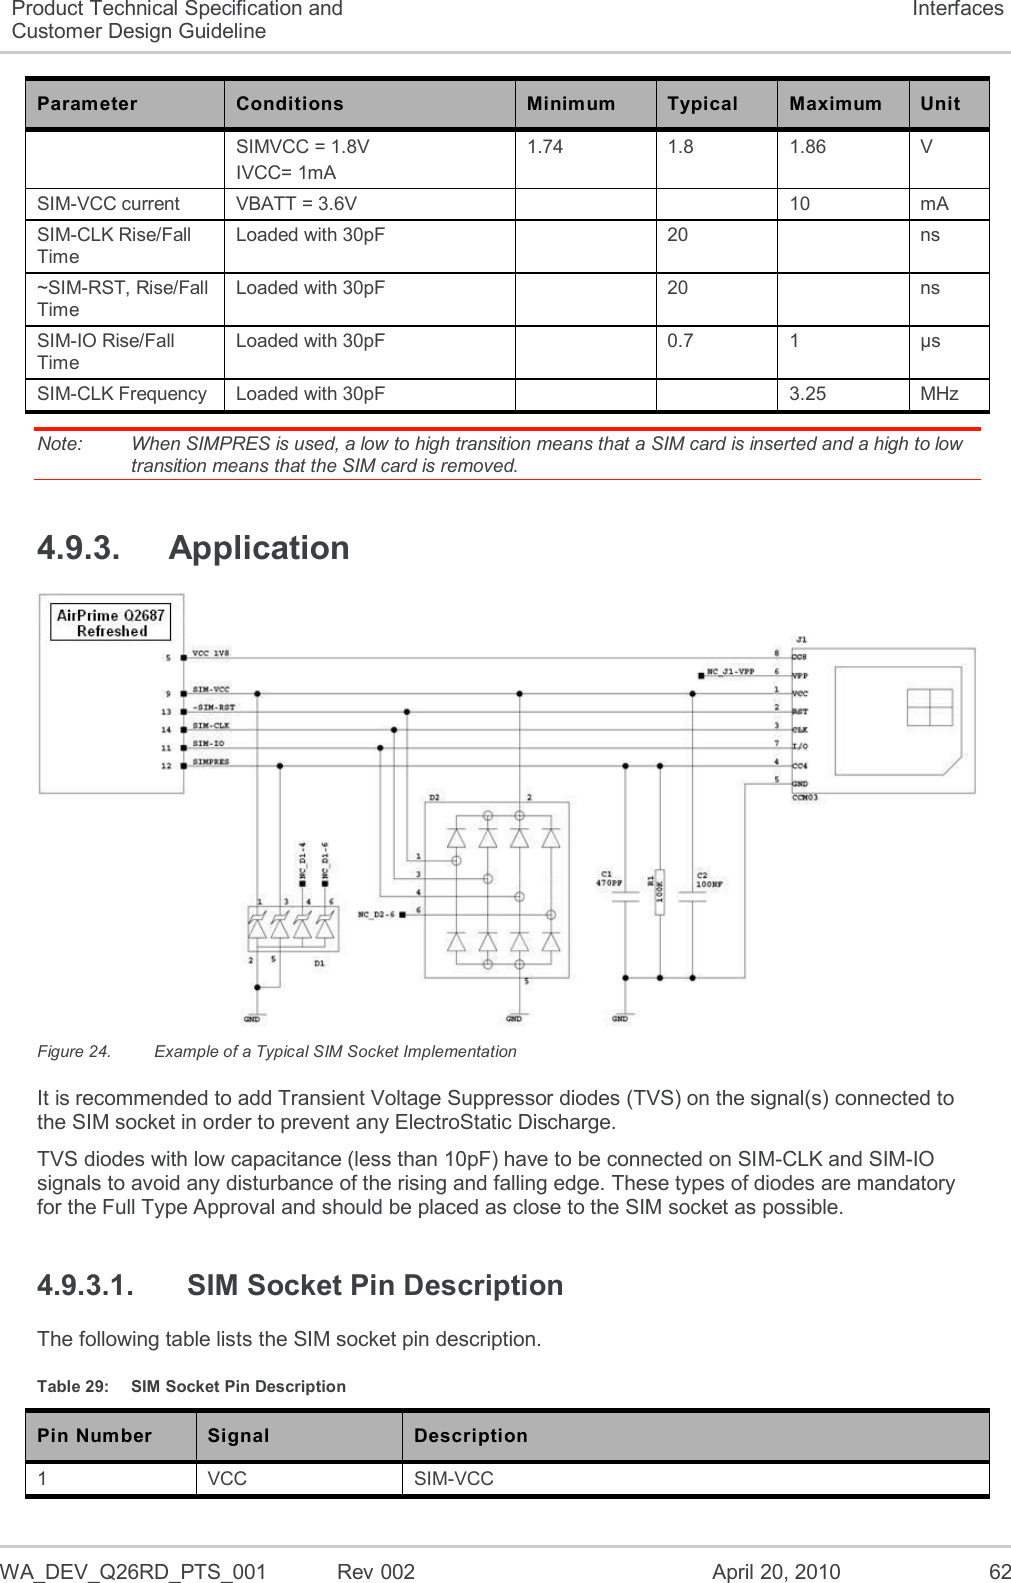  WA_DEV_Q26RD_PTS_001  Rev 002  April 20, 2010 62 Product Technical Specification and Customer Design Guideline Interfaces Parameter Conditions Minimum Typical Maximum Unit SIMVCC = 1.8V IVCC= 1mA 1.74 1.8 1.86 V SIM-VCC current VBATT = 3.6V   10 mA SIM-CLK Rise/Fall Time Loaded with 30pF  20  ns ~SIM-RST, Rise/Fall Time Loaded with 30pF  20  ns SIM-IO Rise/Fall Time Loaded with 30pF  0.7 1 µs SIM-CLK Frequency Loaded with 30pF   3.25 MHz Note:   When SIMPRES is used, a low to high transition means that a SIM card is inserted and a high to low transition means that the SIM card is removed. 4.9.3.  Application  Figure 24.  Example of a Typical SIM Socket Implementation It is recommended to add Transient Voltage Suppressor diodes (TVS) on the signal(s) connected to the SIM socket in order to prevent any ElectroStatic Discharge. TVS diodes with low capacitance (less than 10pF) have to be connected on SIM-CLK and SIM-IO signals to avoid any disturbance of the rising and falling edge. These types of diodes are mandatory for the Full Type Approval and should be placed as close to the SIM socket as possible. 4.9.3.1.  SIM Socket Pin Description The following table lists the SIM socket pin description. Table 29:  SIM Socket Pin Description Pin Number Signal Description 1 VCC SIM-VCC 